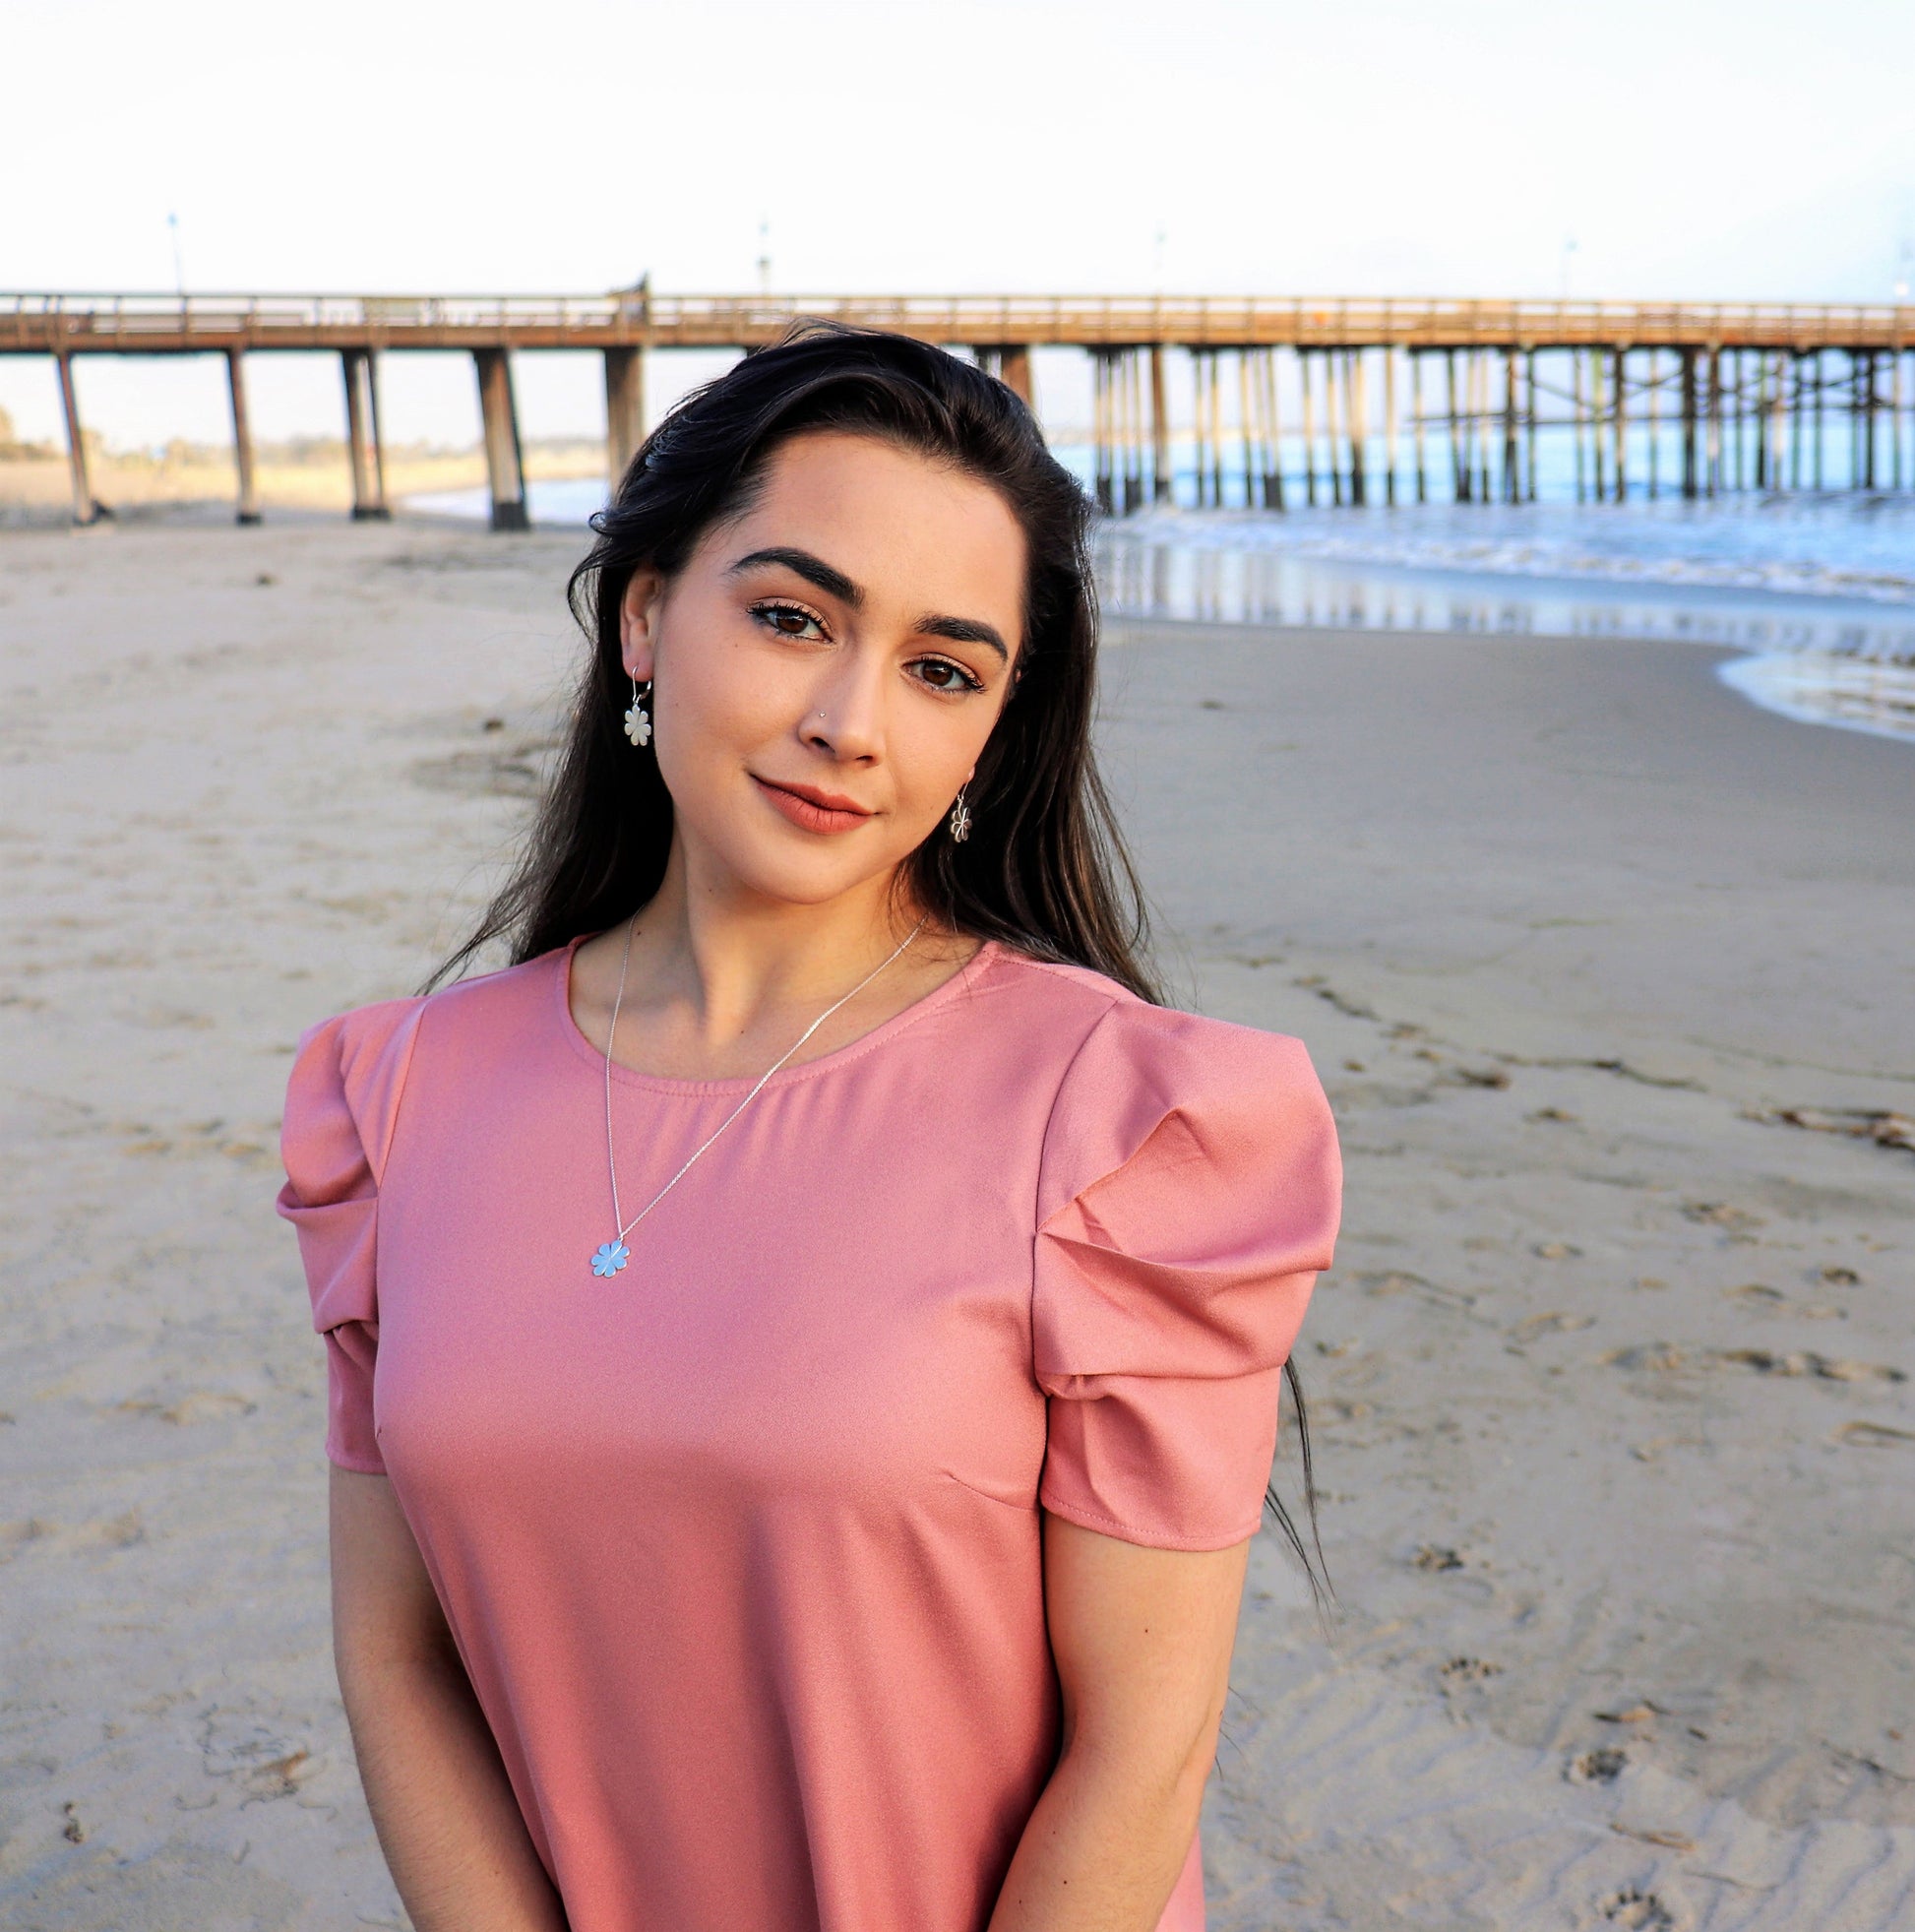 woman in a pink dress on beach wearing flower earrings and a matching necklace